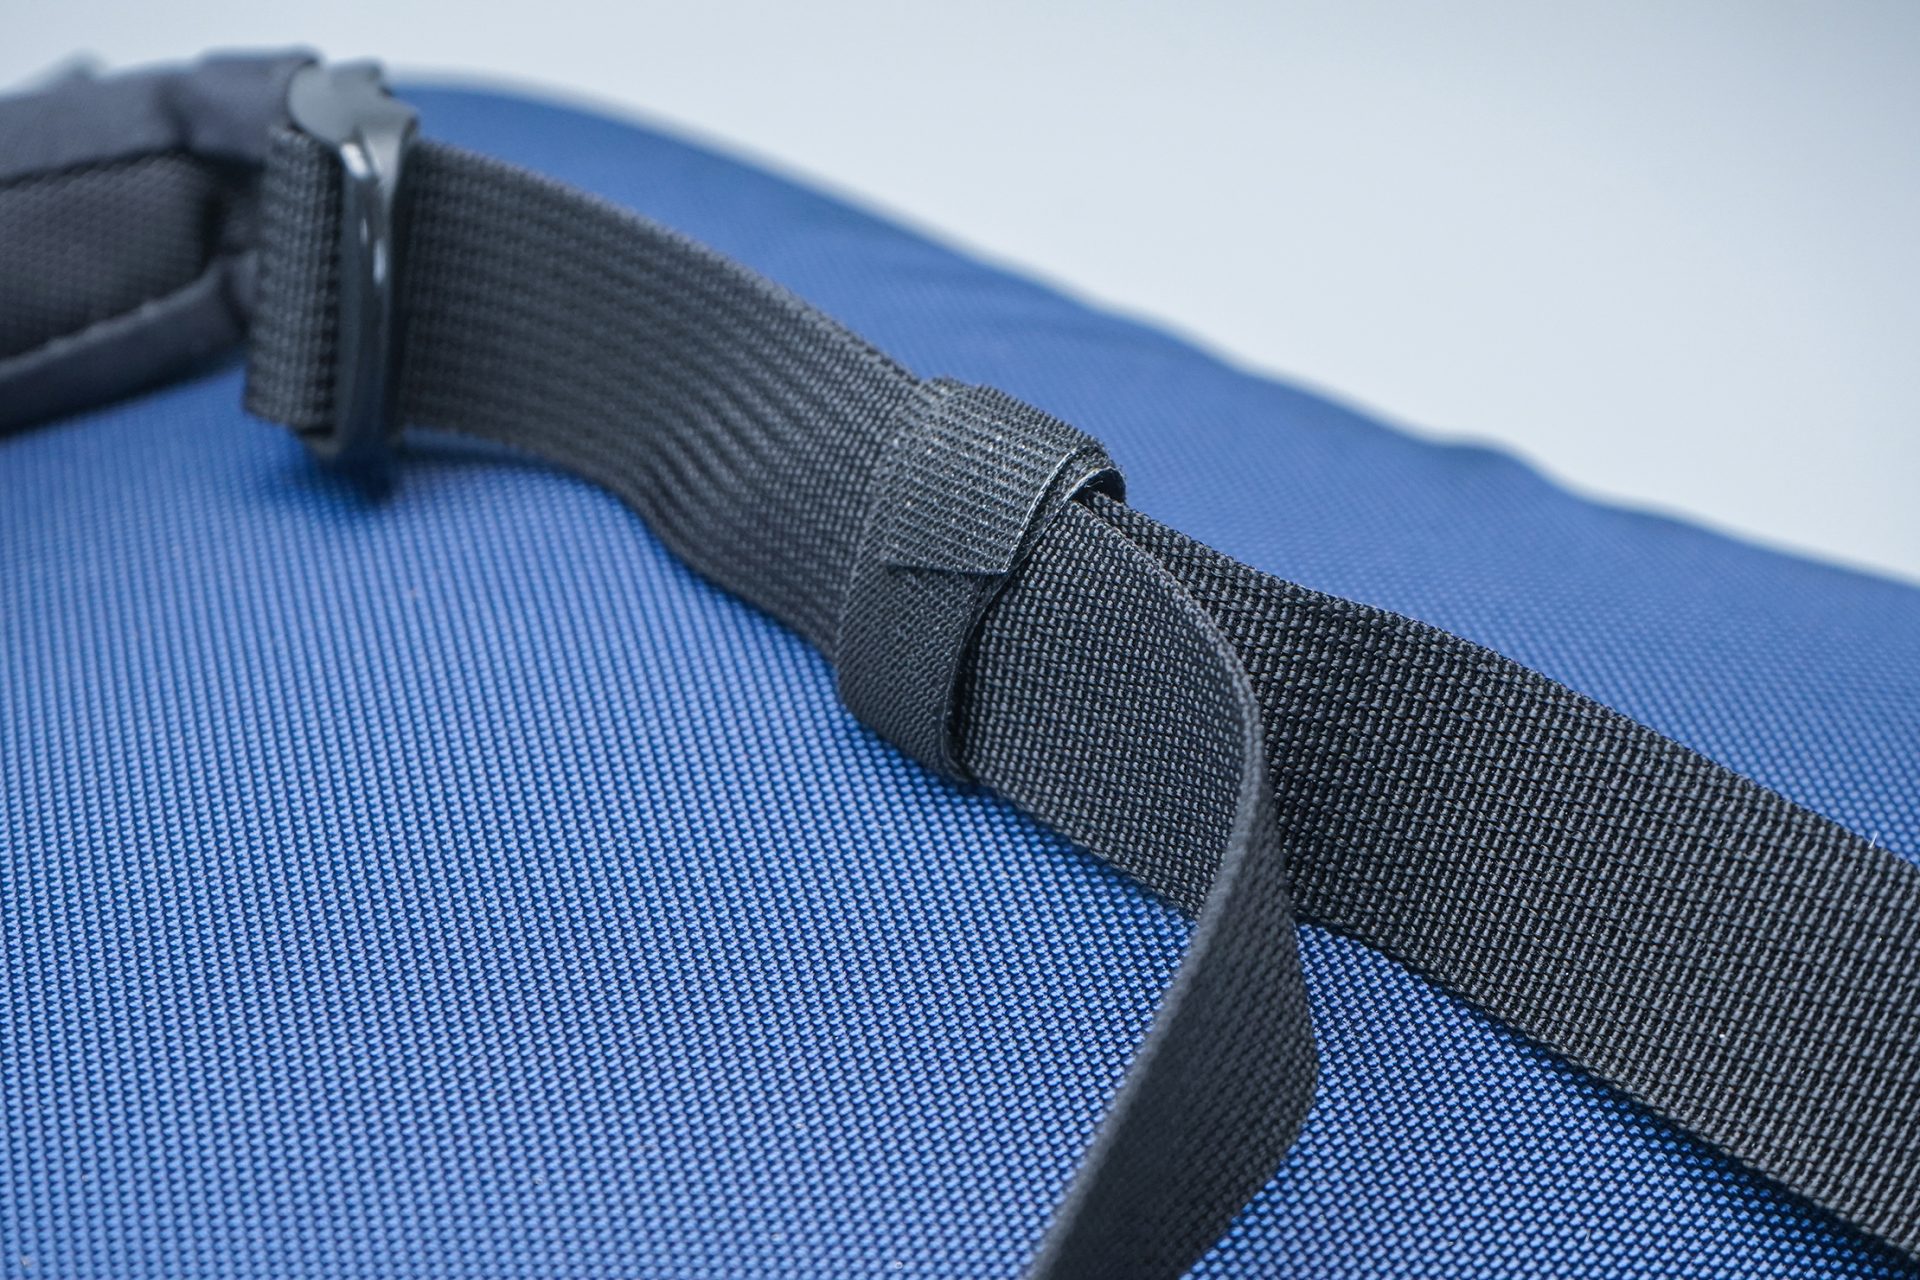 VELCRO Brand Cable Ties on strap